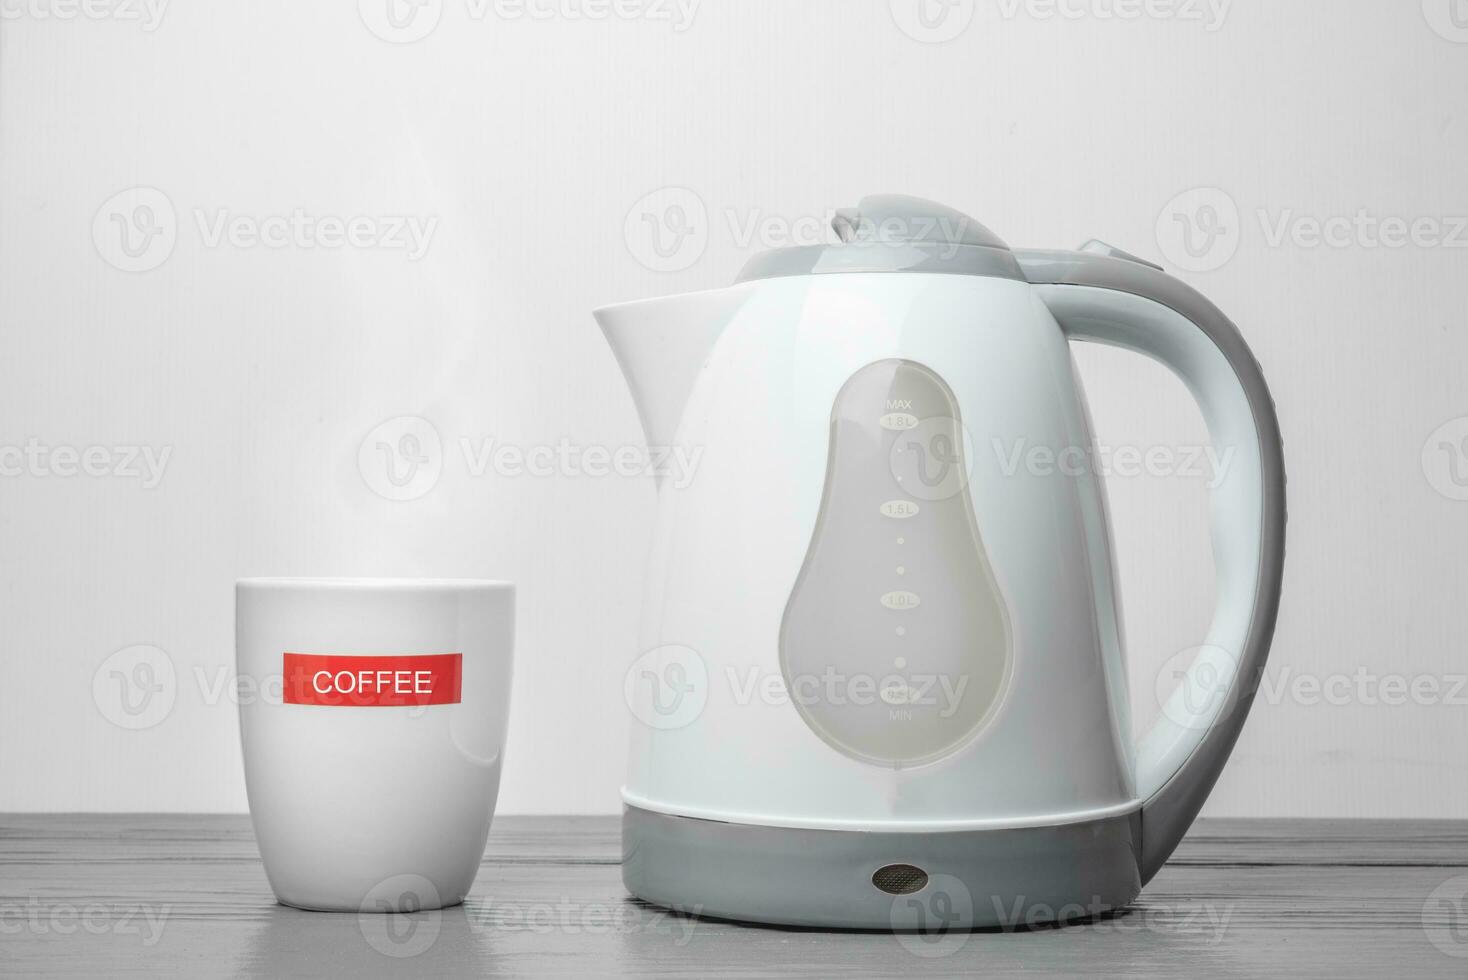 Electric kettle and Coffee cup on wooden table photo